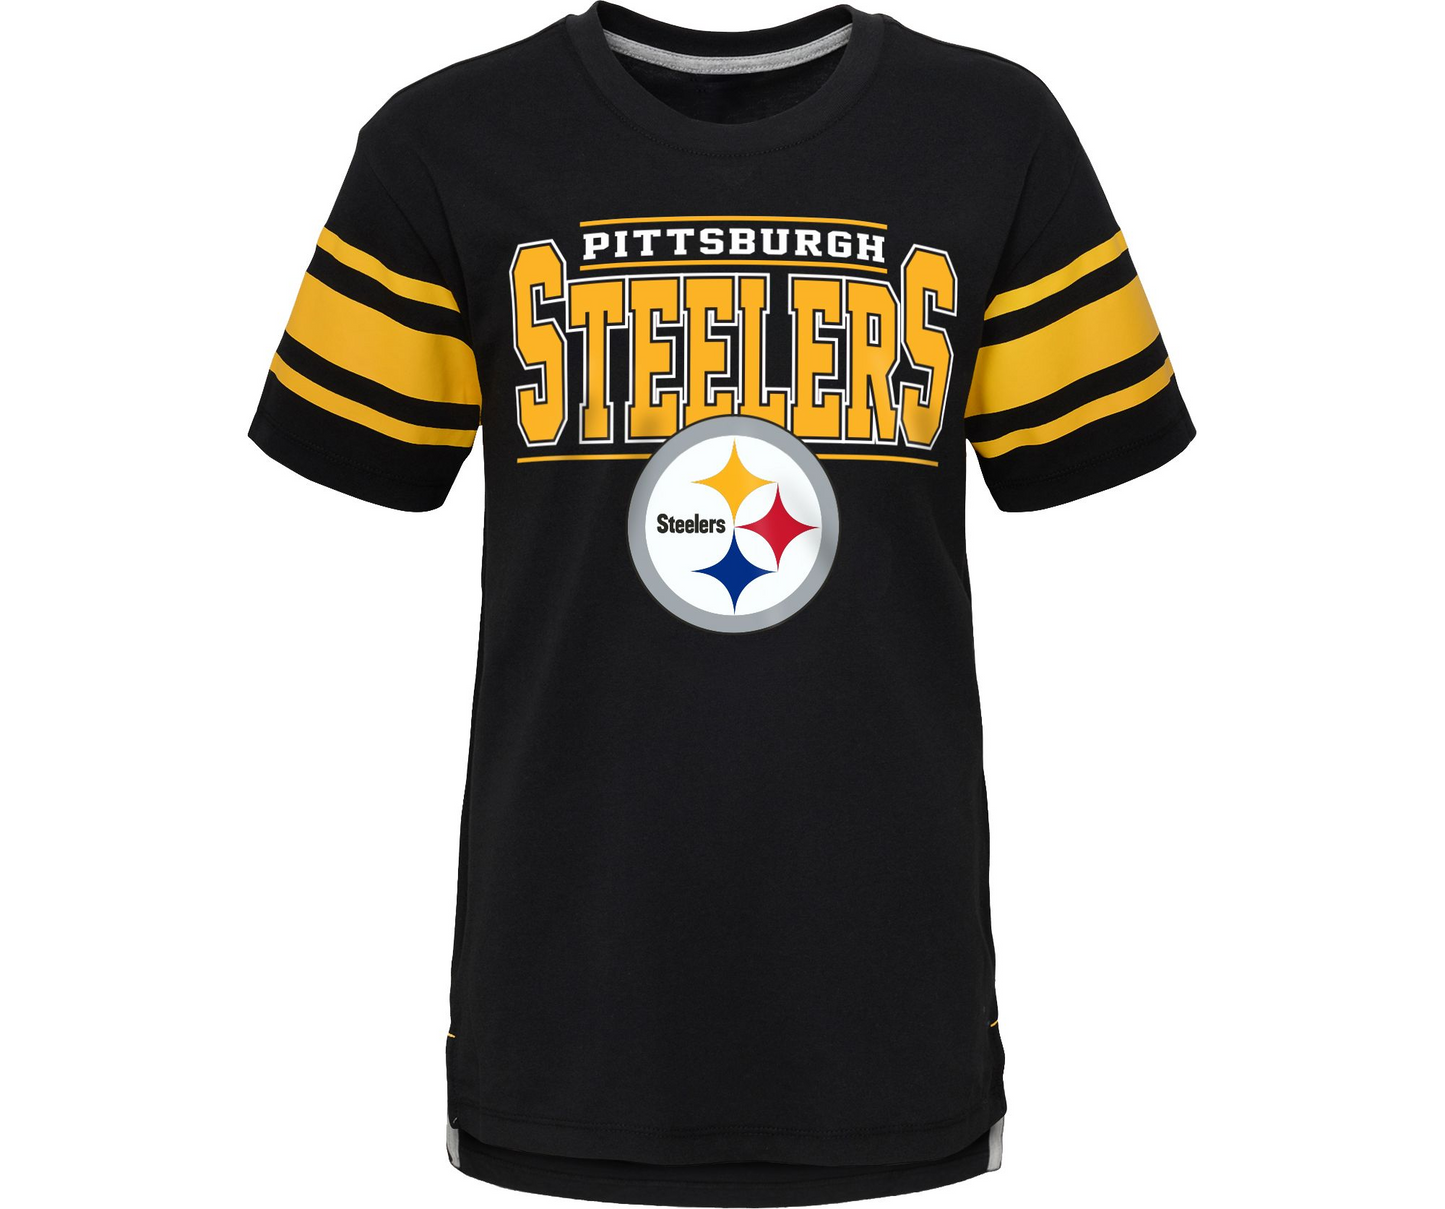 PITTSBURGH STEELERS YOUTH HUDDLE UP T-SHIRT